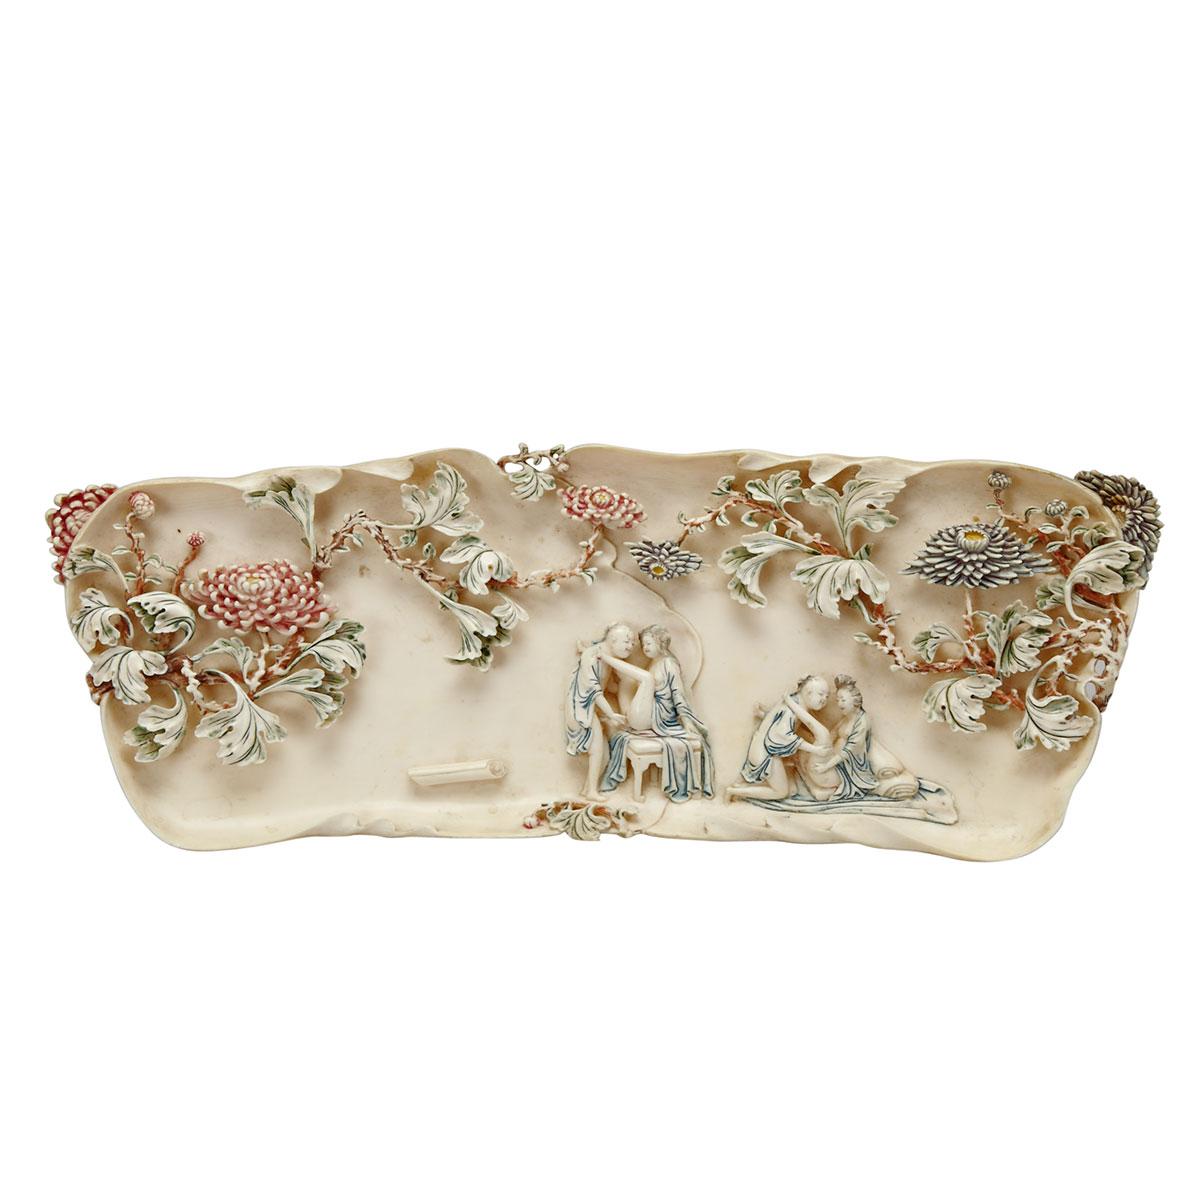 Tinted Ivory Carved Erotic Tray, 19th Century